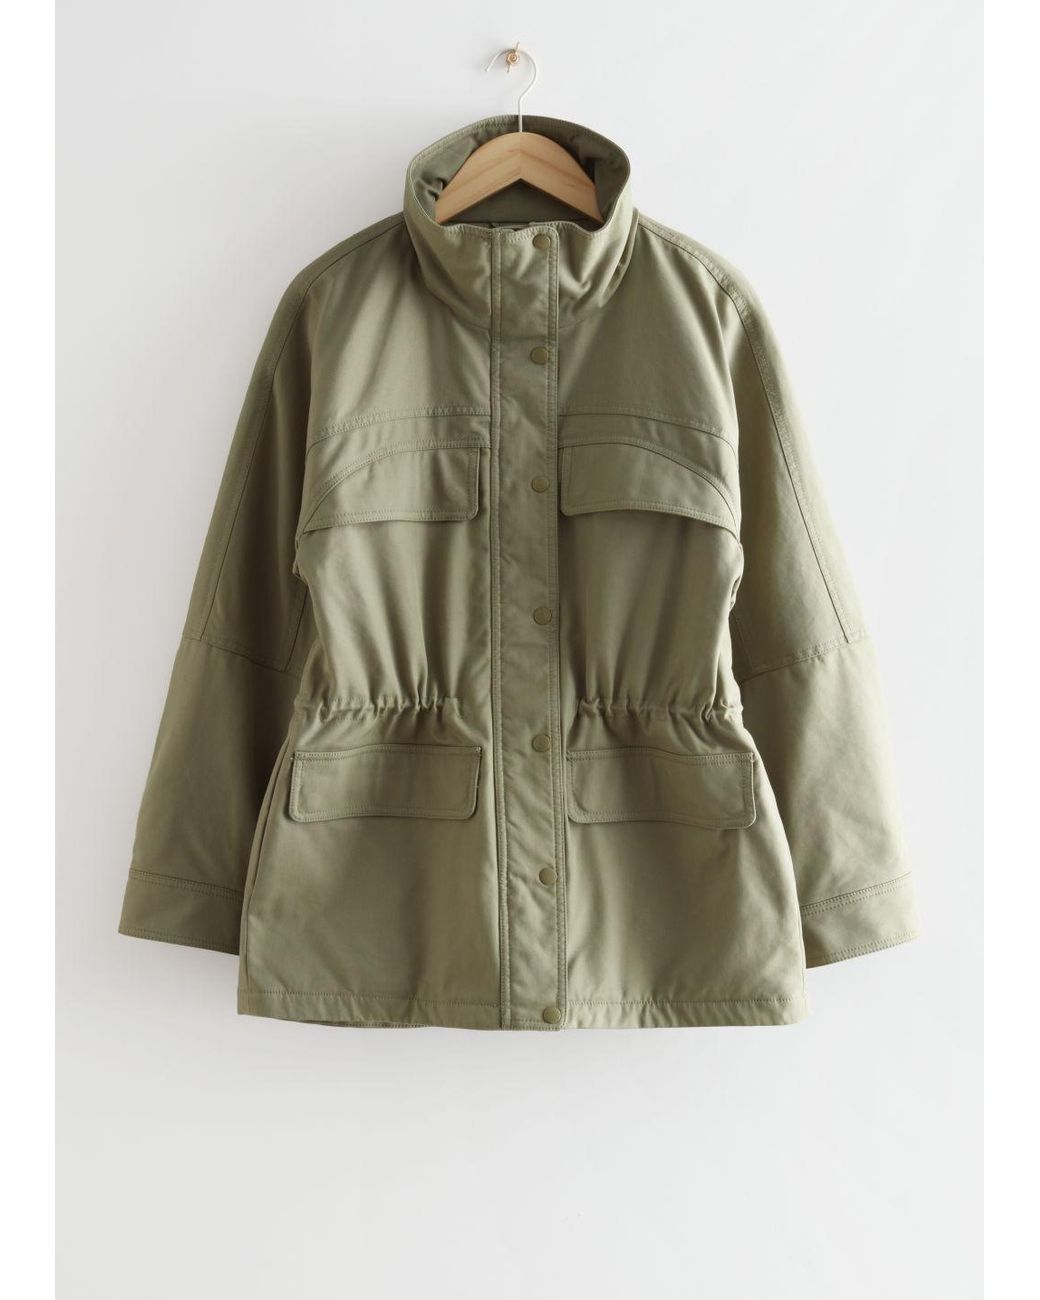 & Other Stories Oversized Cotton Jacket in Green | Lyst